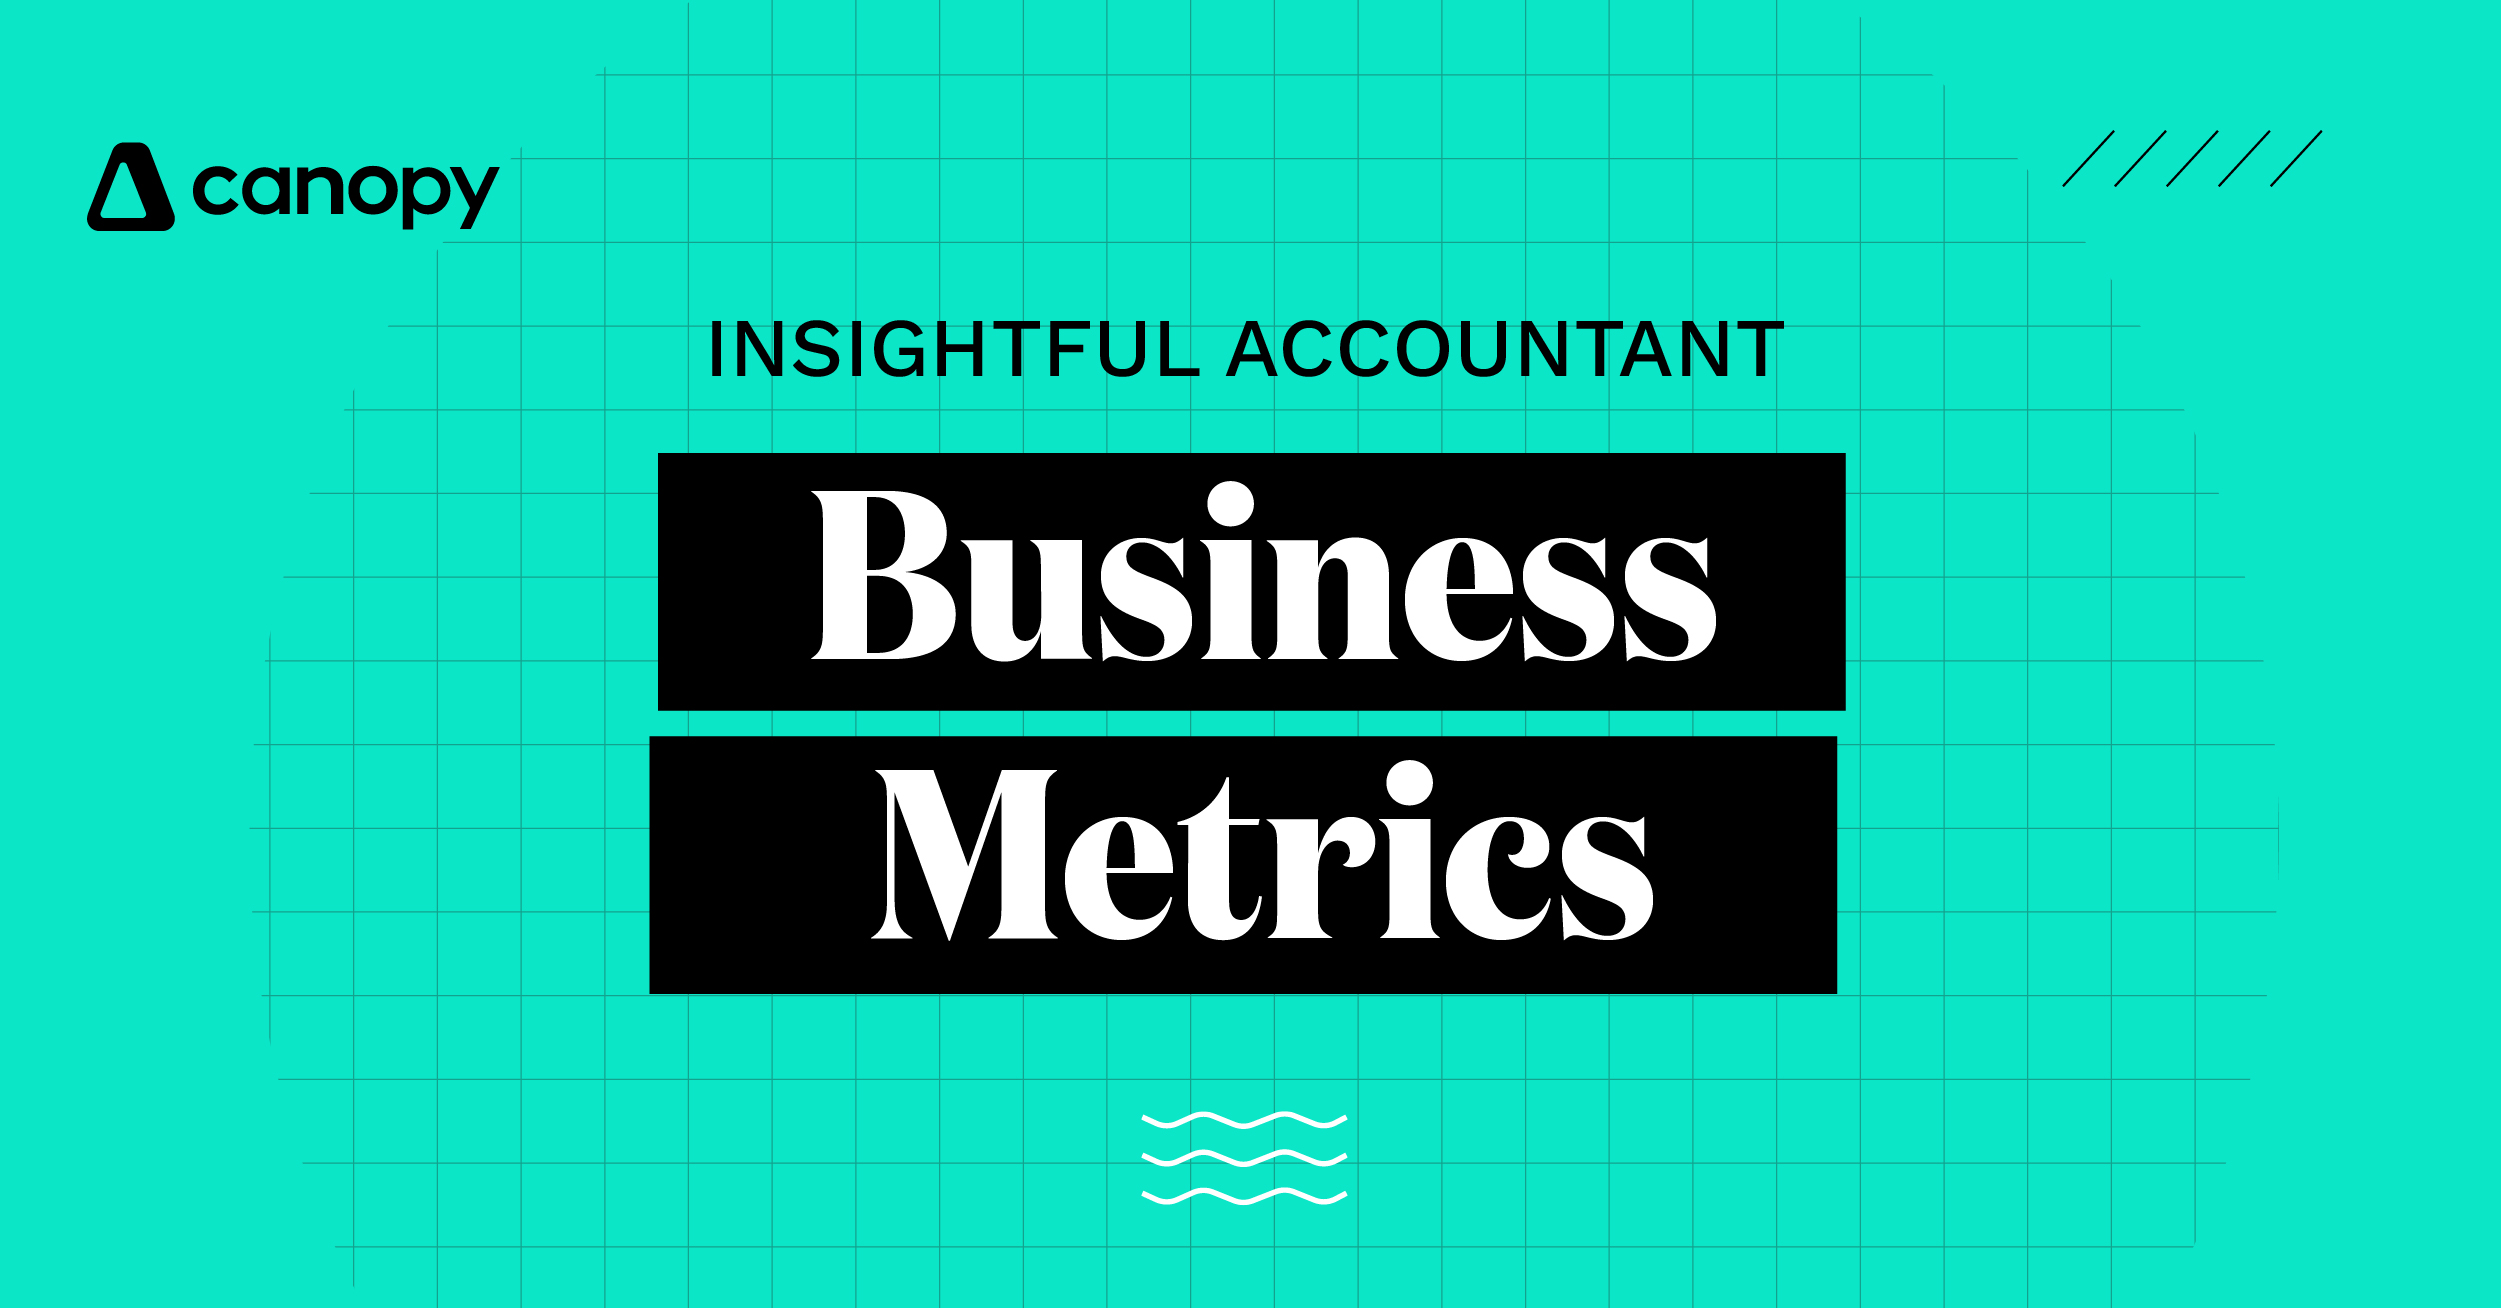 Business Metrics: You're Tracking Data, But Are You Improving?